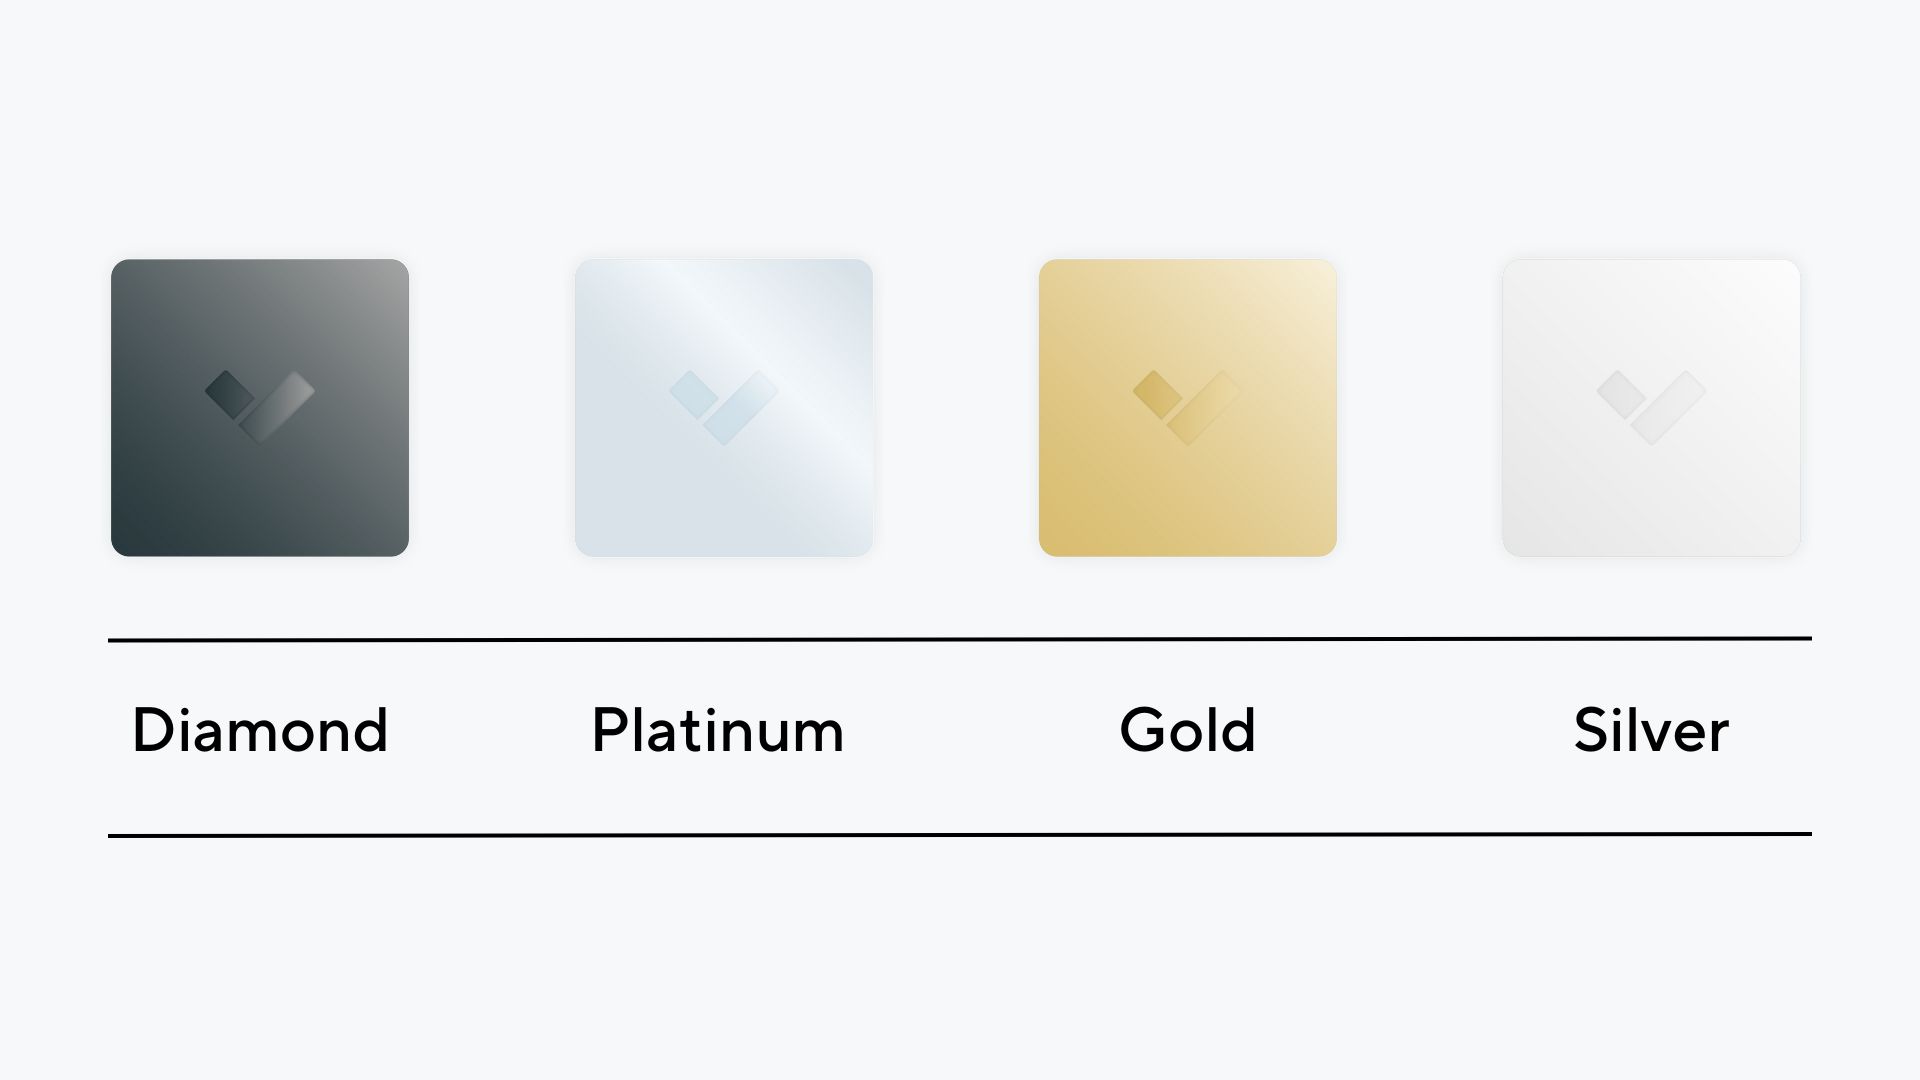 Our new Partner Program has four membership levels: Diamond, Platinum, Gold, and Silver.